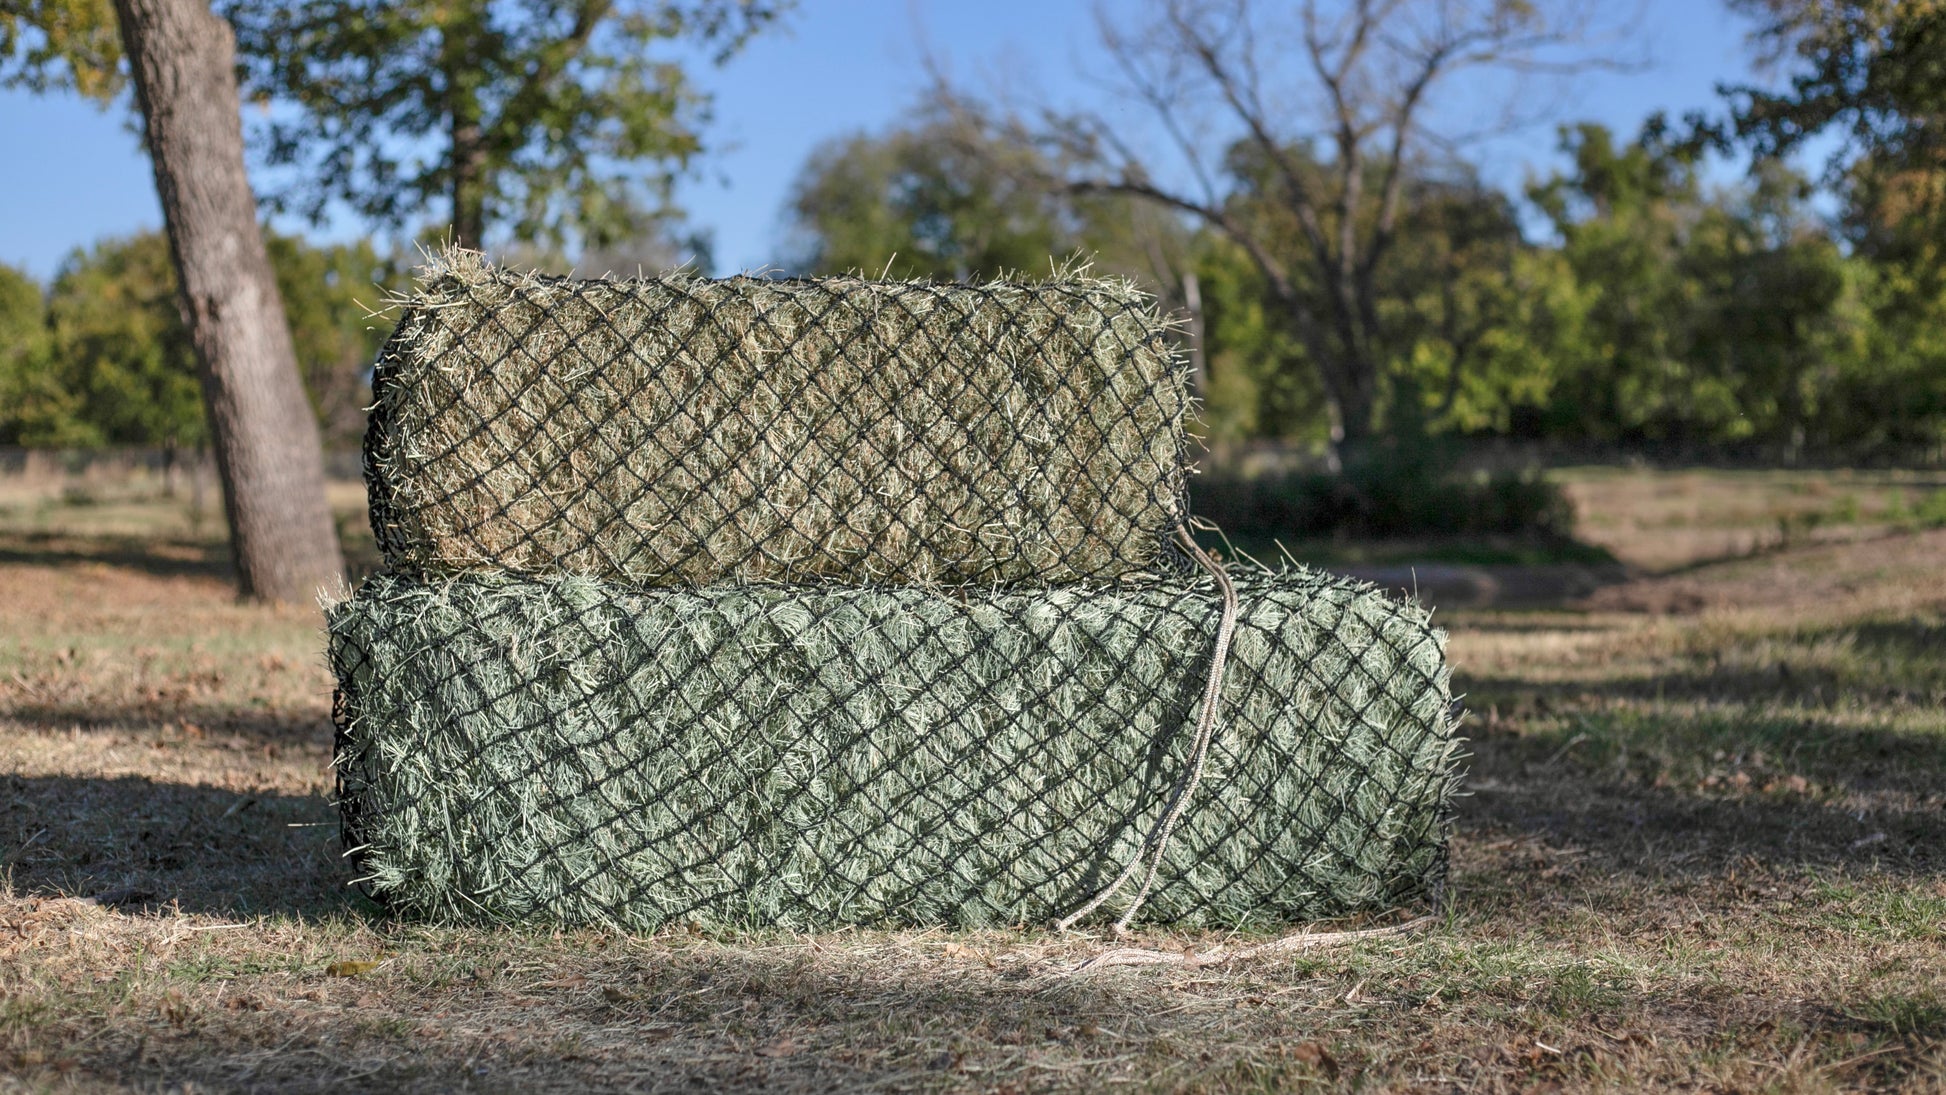 Hay Chix Slow Feed Hay Net for [Horse and Livestock Health, hay Feeder, hay  net, Slow Feed hay net] Save Your time, hay and Money! Half Bale Net (1